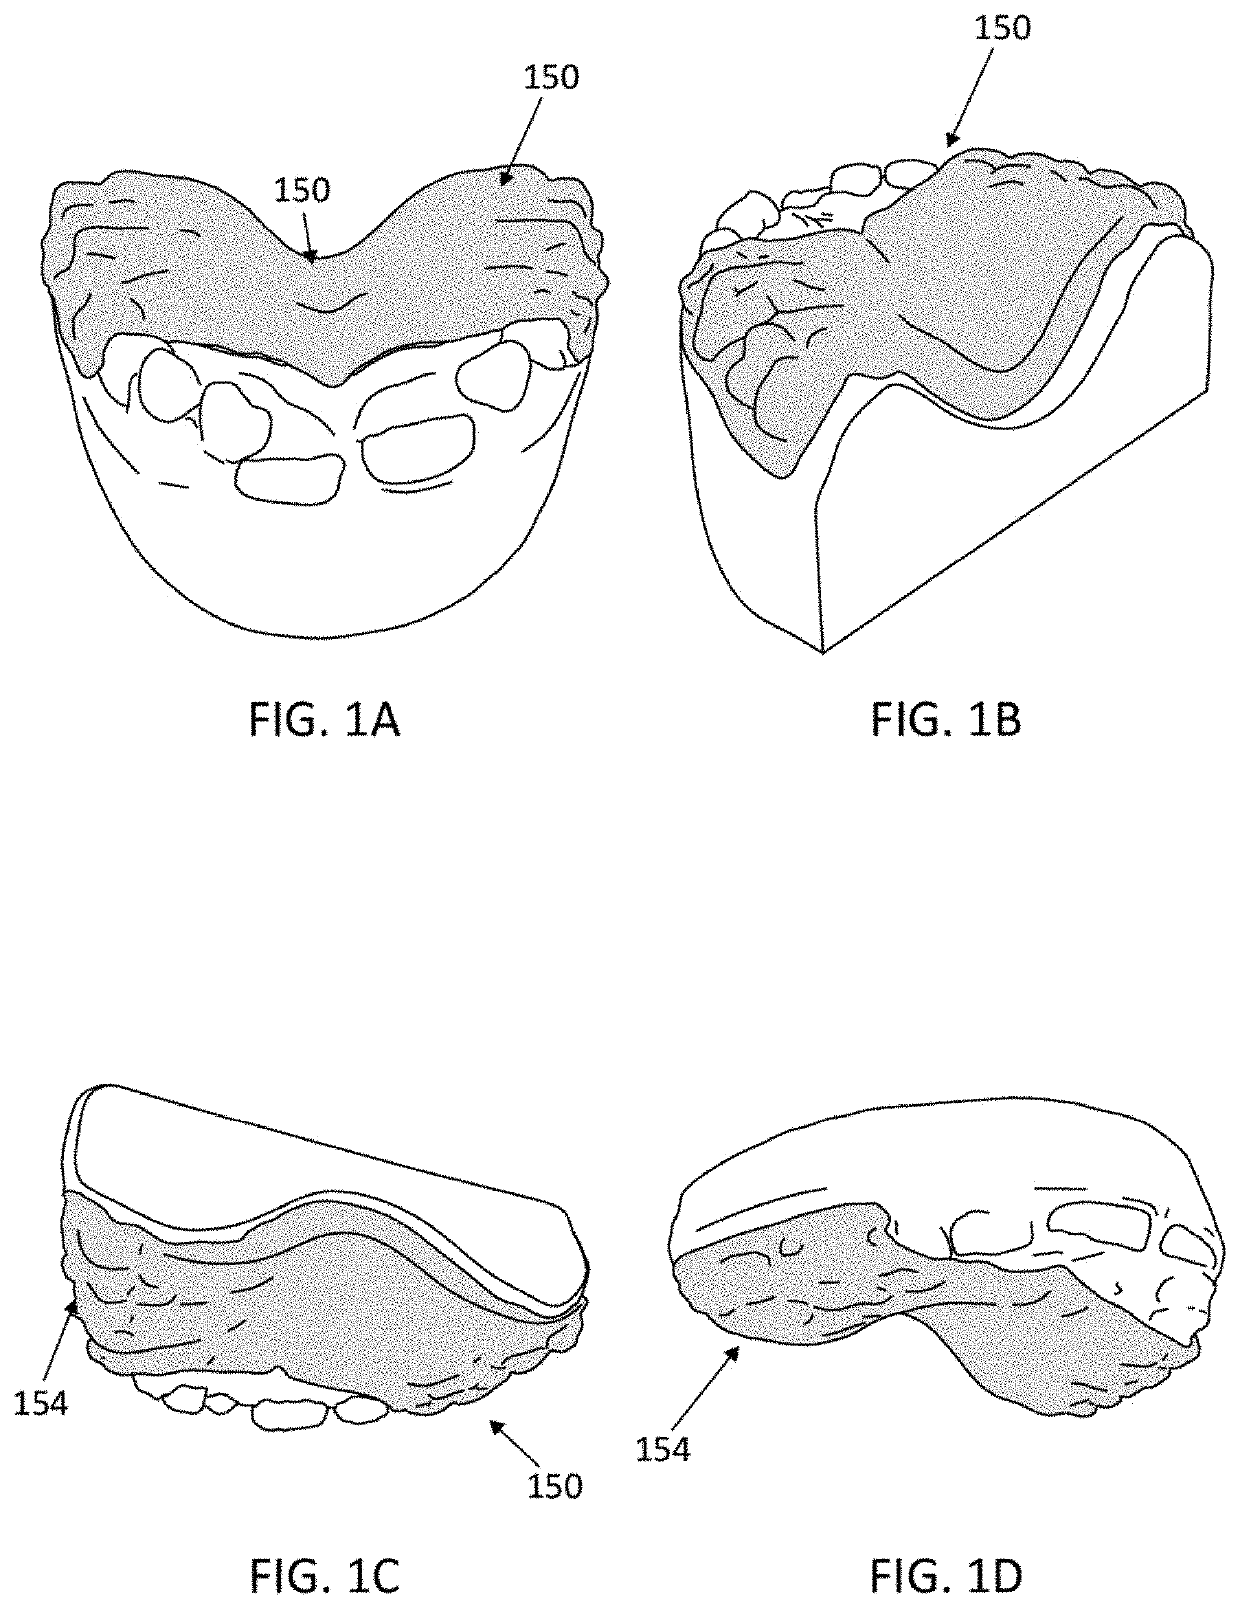 Palatal expanders and methods of expanding a palate